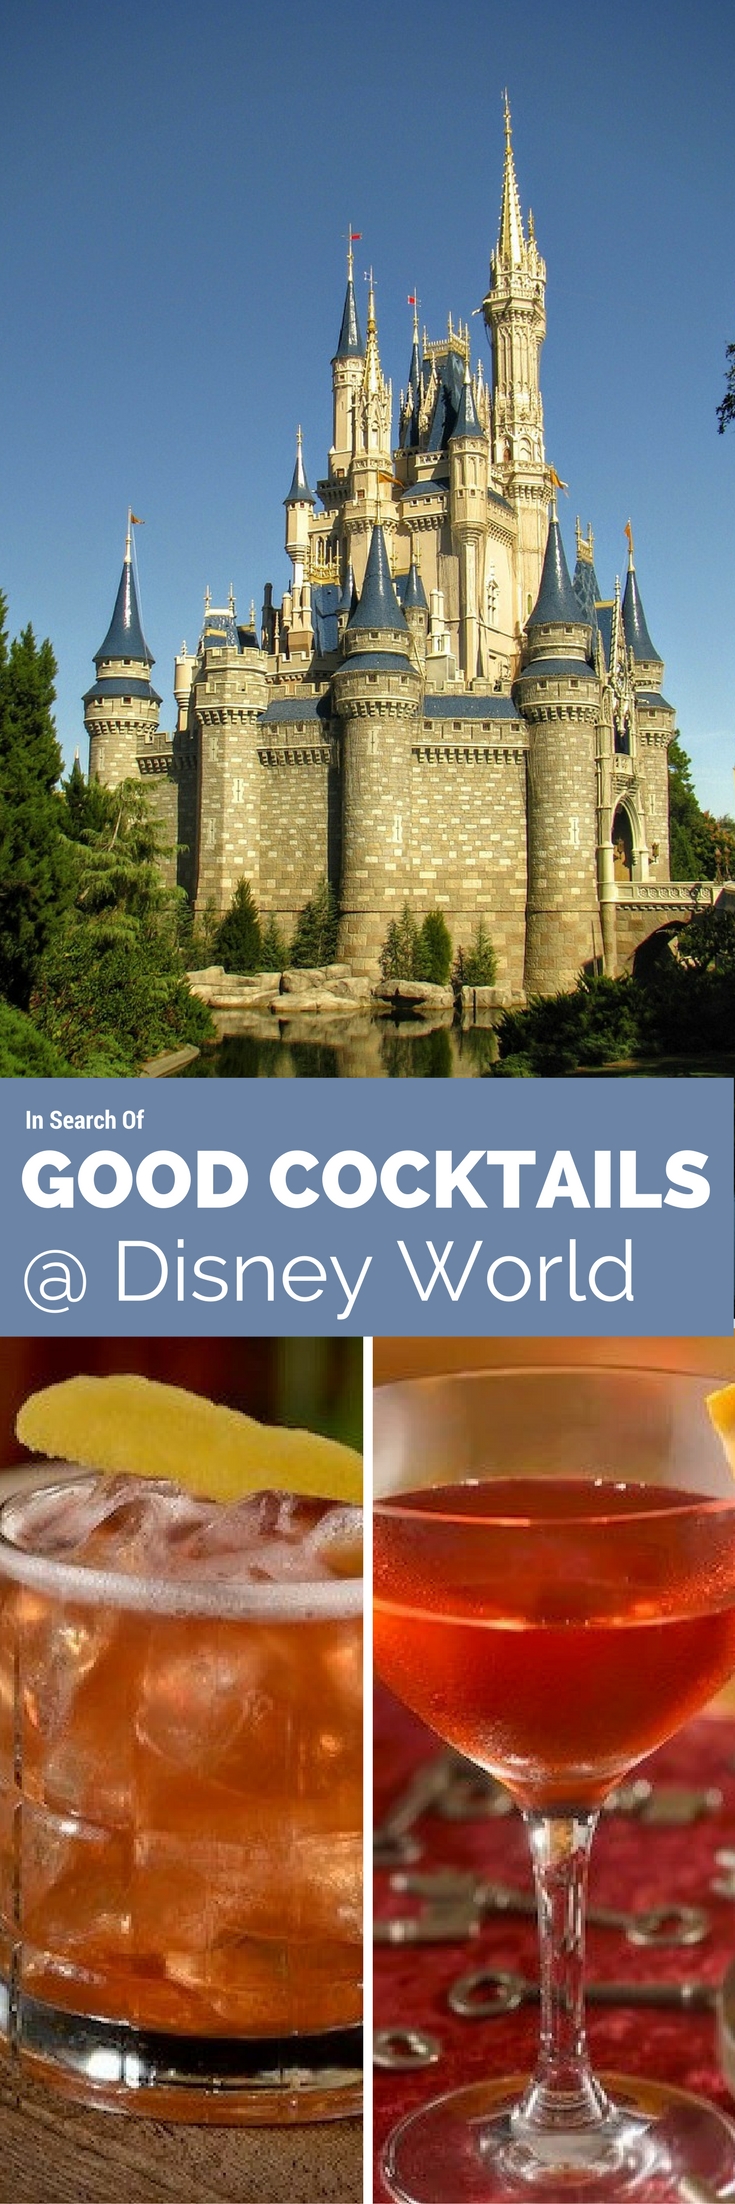 In search of good cocktails at Disney World